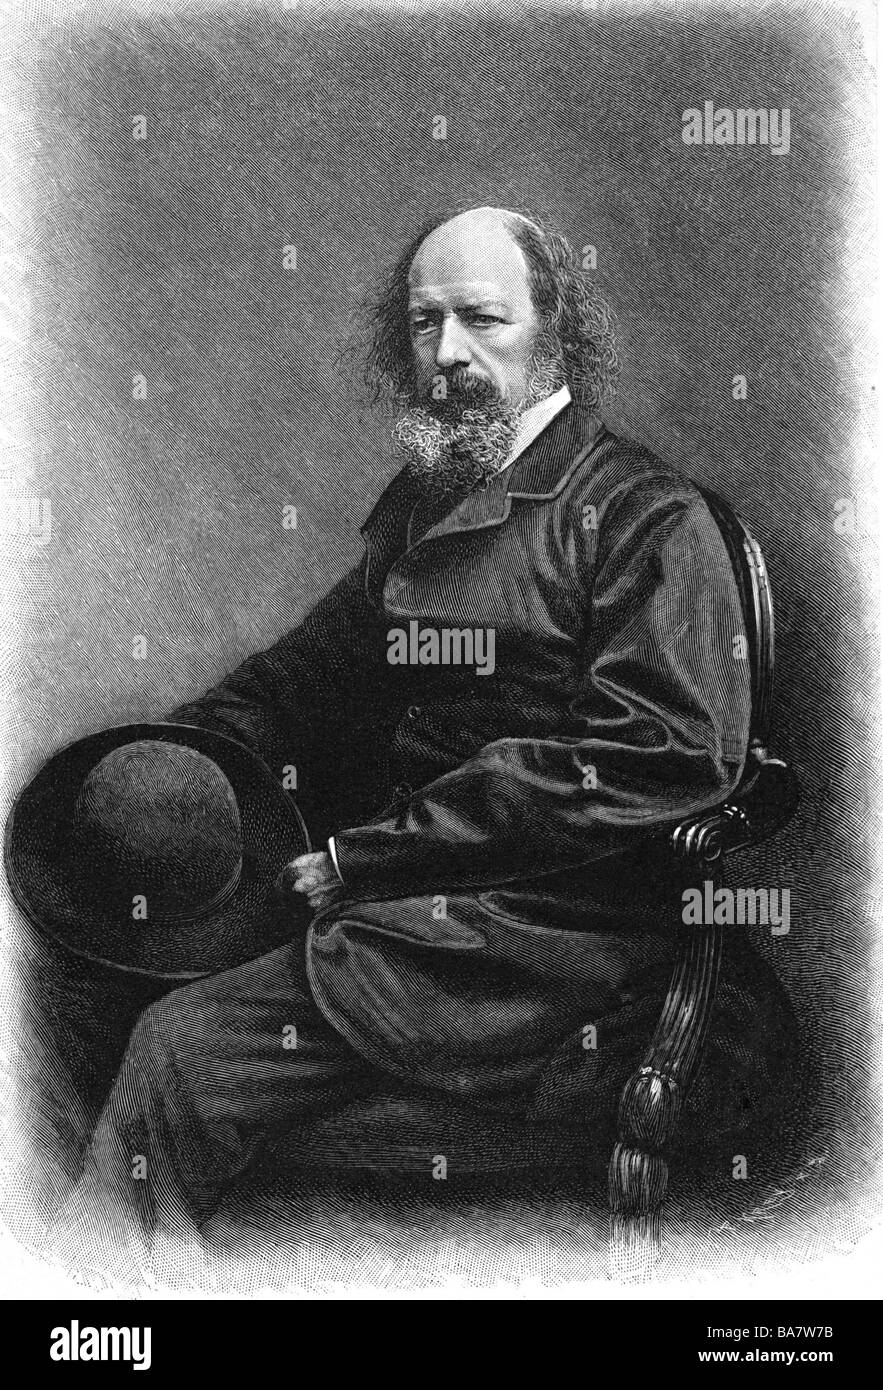 Tennyson, Alfred Lord, 6.8.1809 - 6.10.1892, British author / writer, half length, sitting, wood engraving, 19th century, after photo by Elliot & Fry, London, Stock Photo